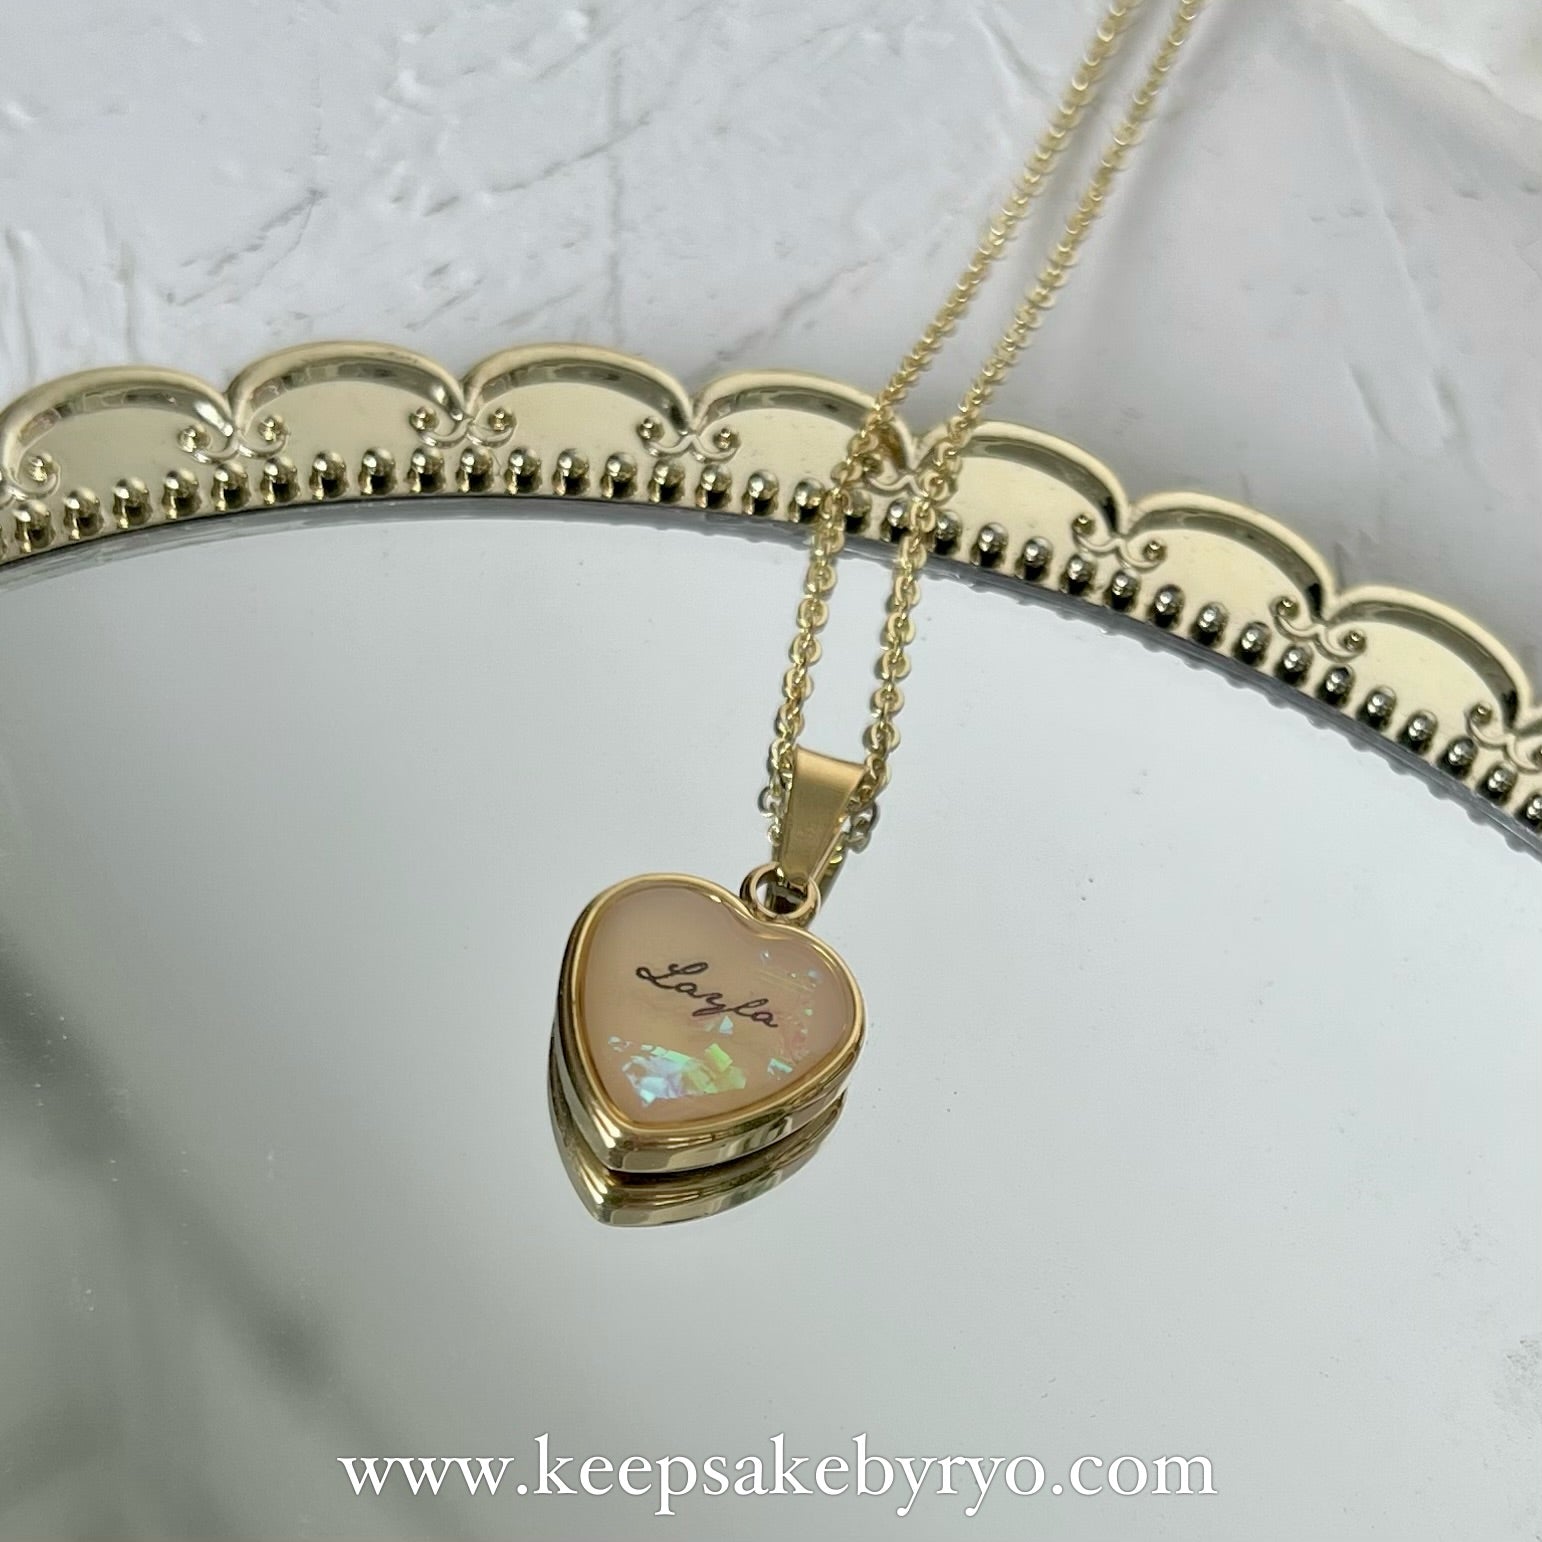 15MM CLASSIC HEART BREASTMILK PENDANT WITH ACCENT FLAKES NECKLACE